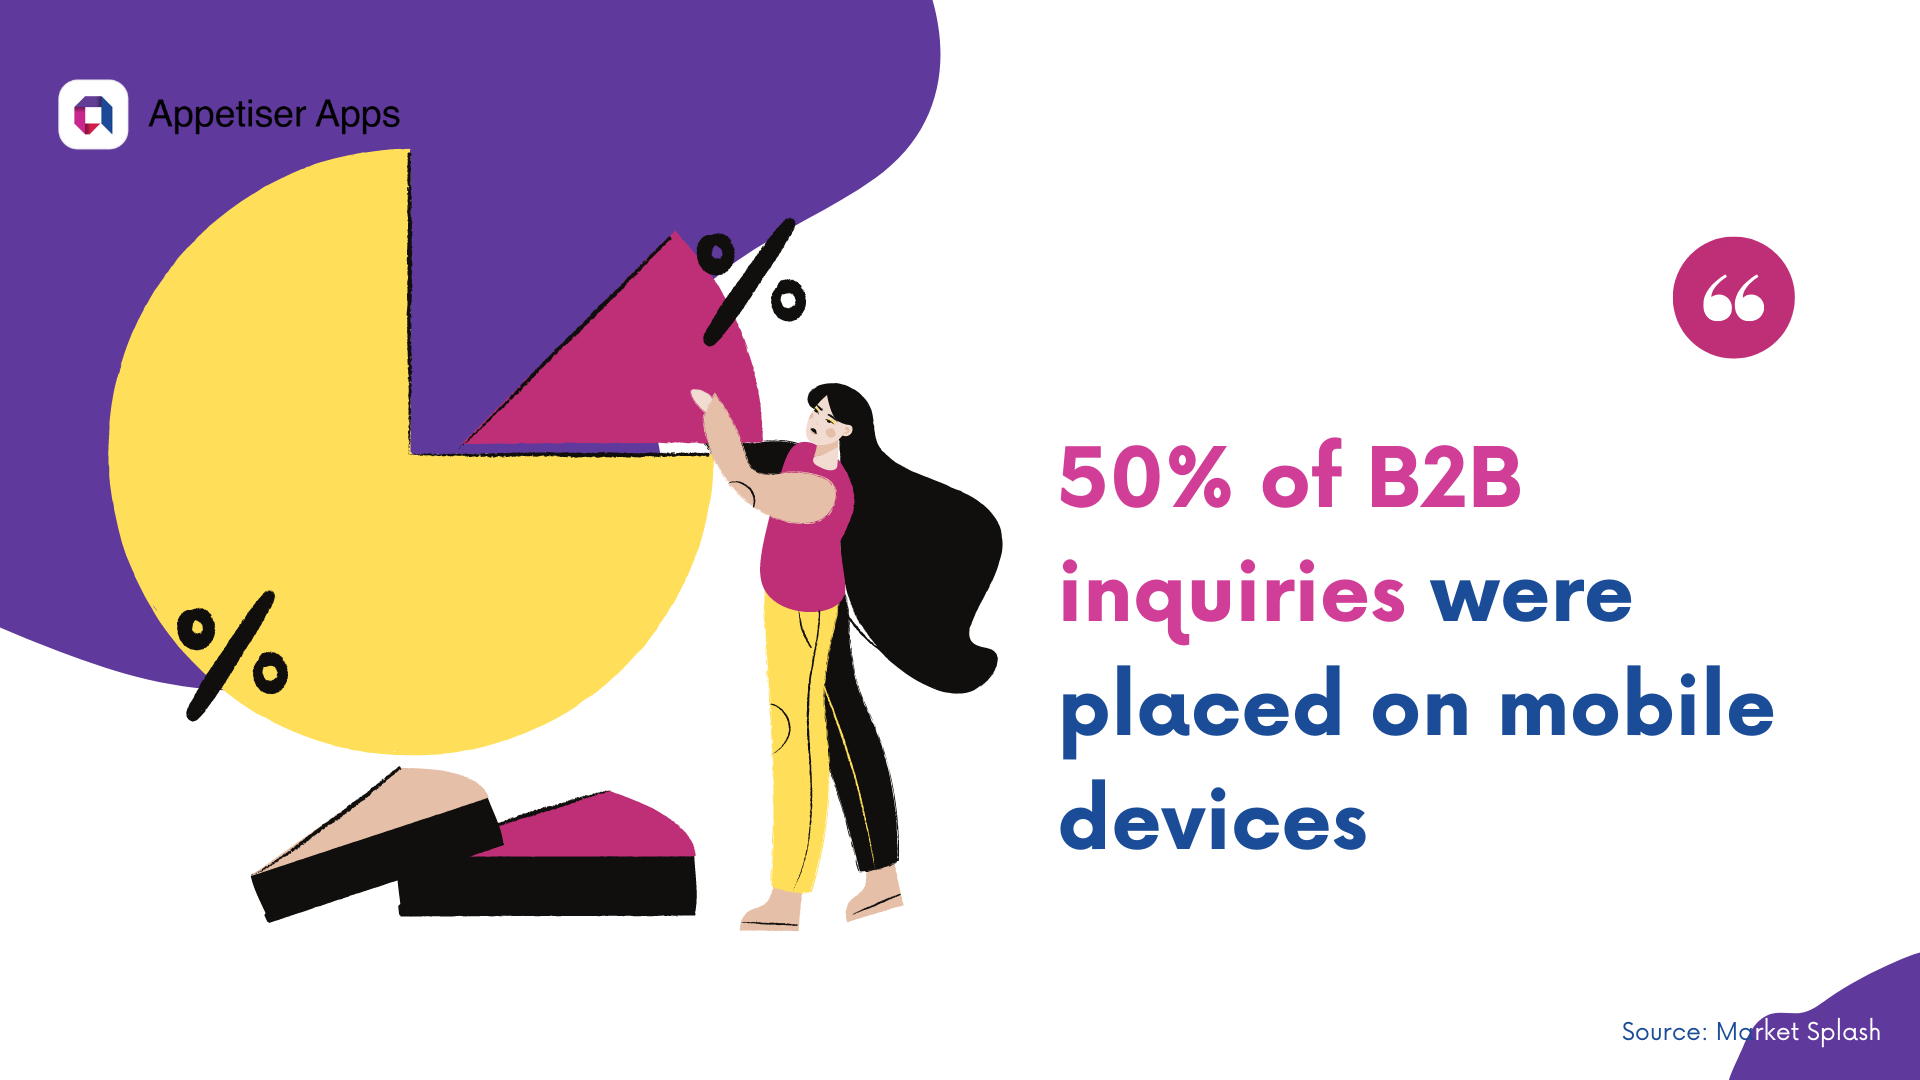 BETS: B2B ecommerce trends and statistics on B2B inquiries on mobile devices